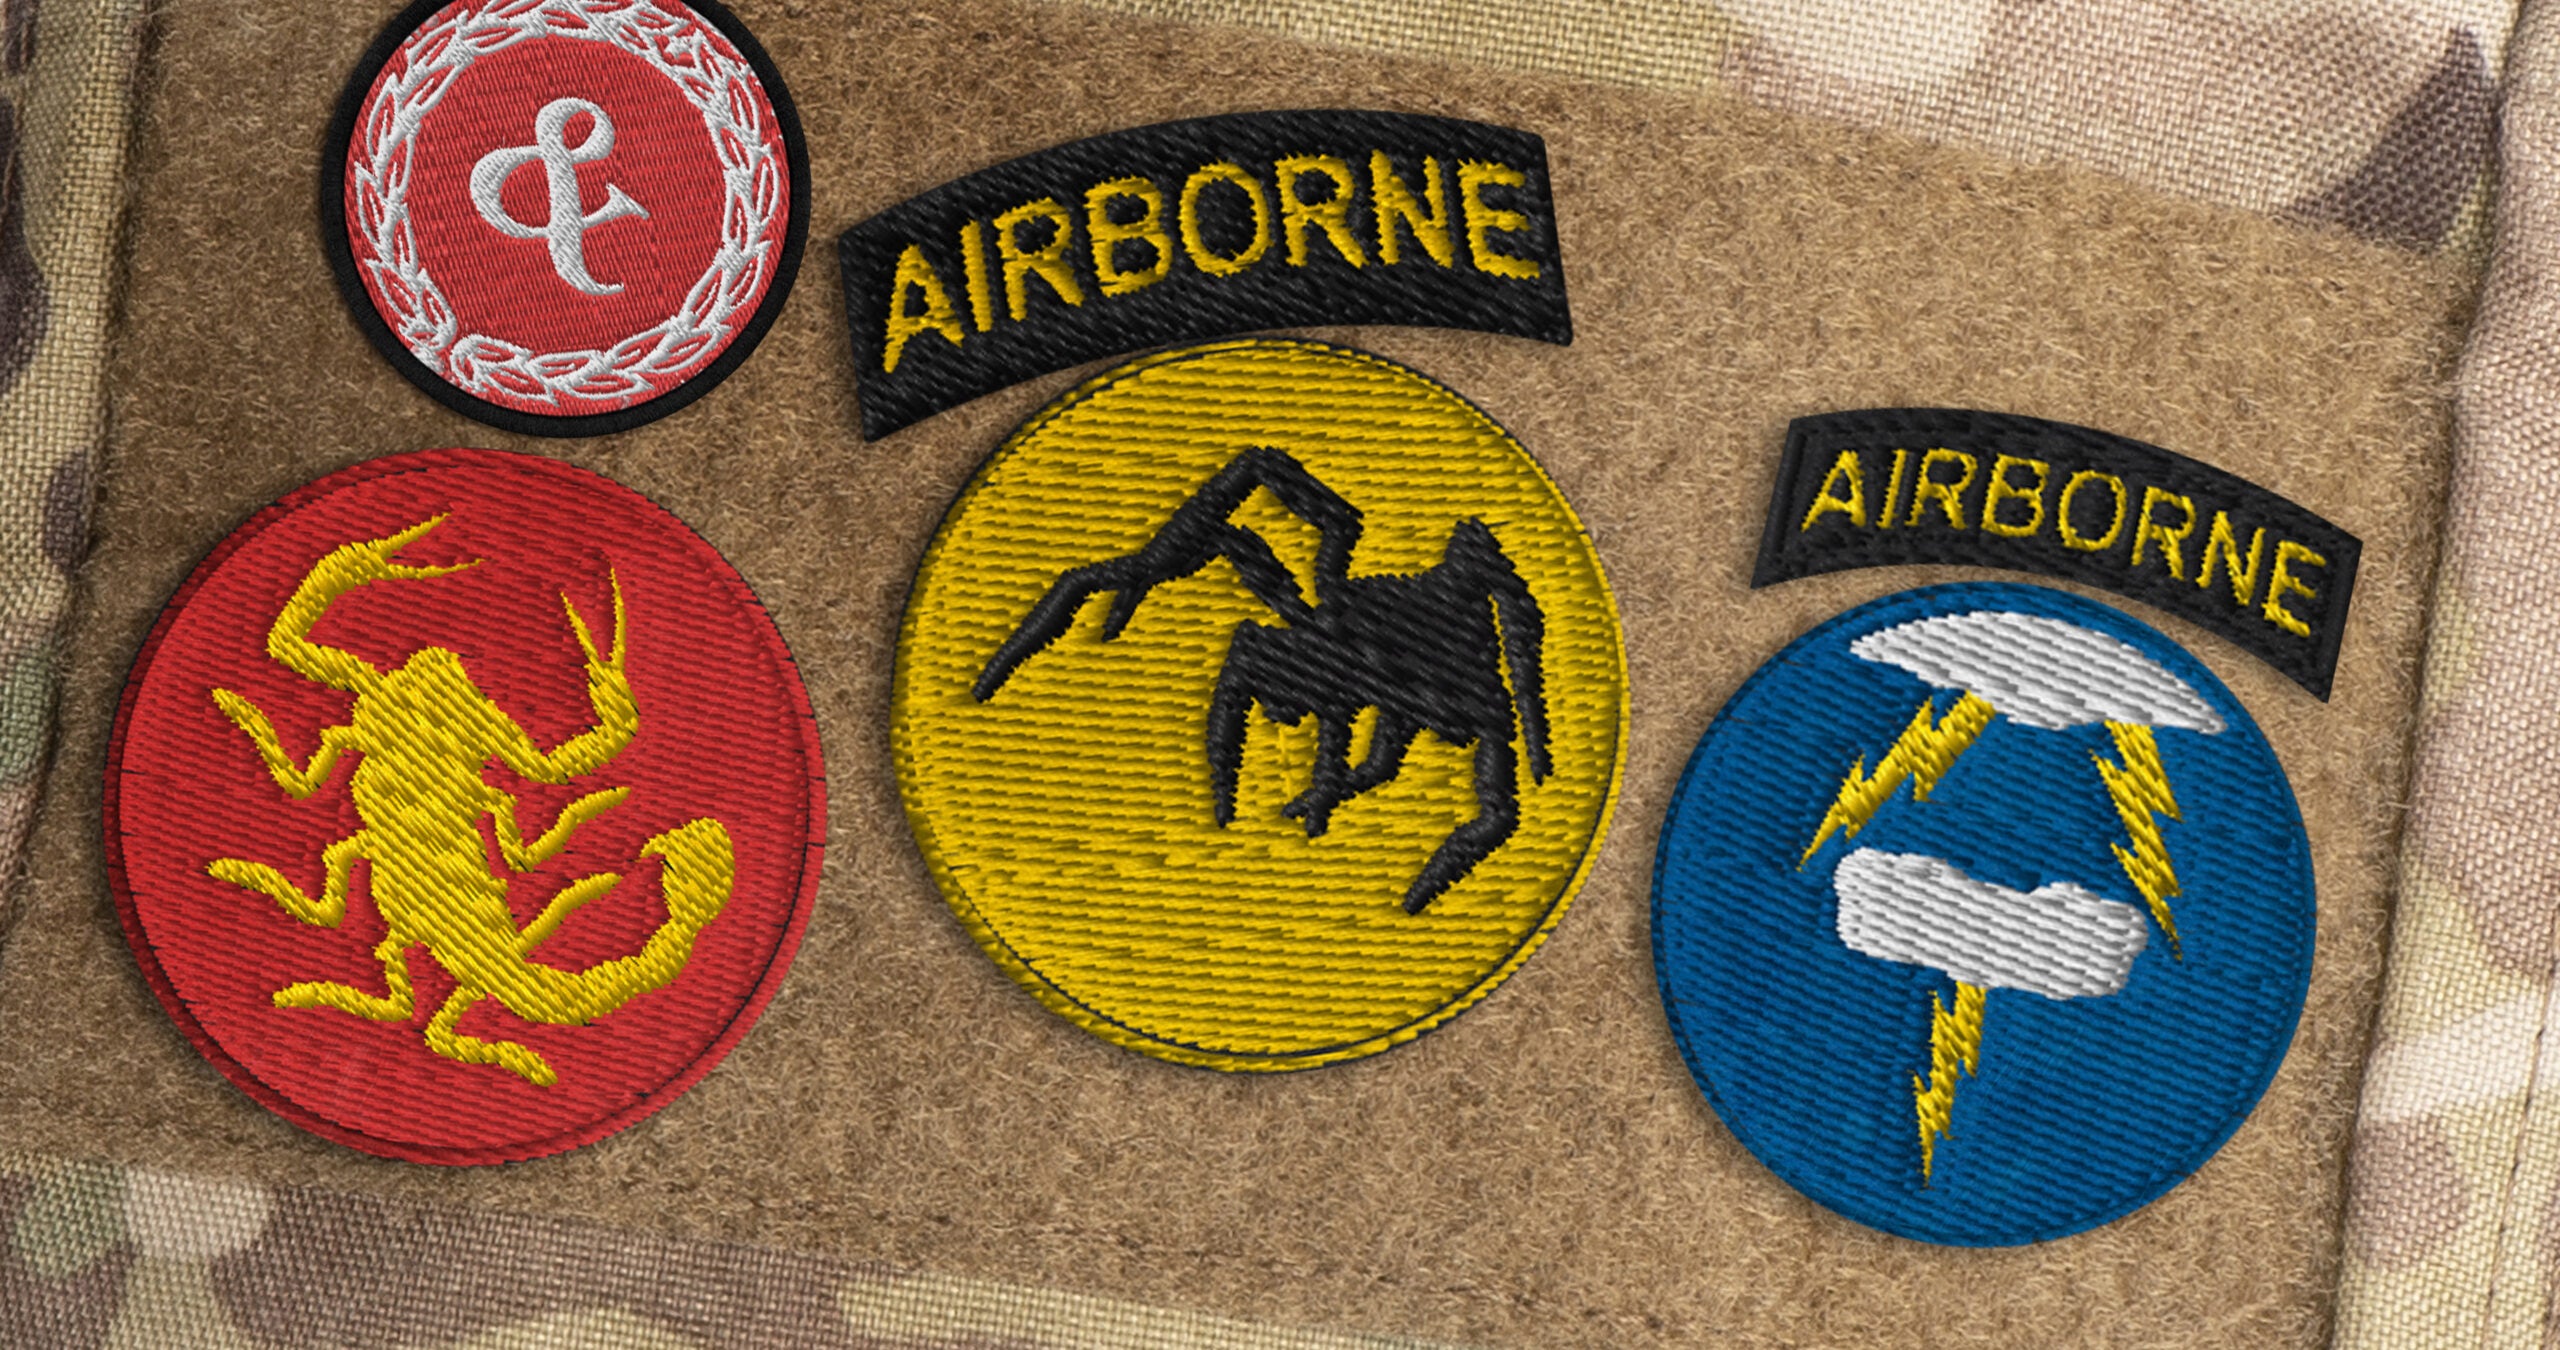 US Army Europe Patch - Other Army Patches 